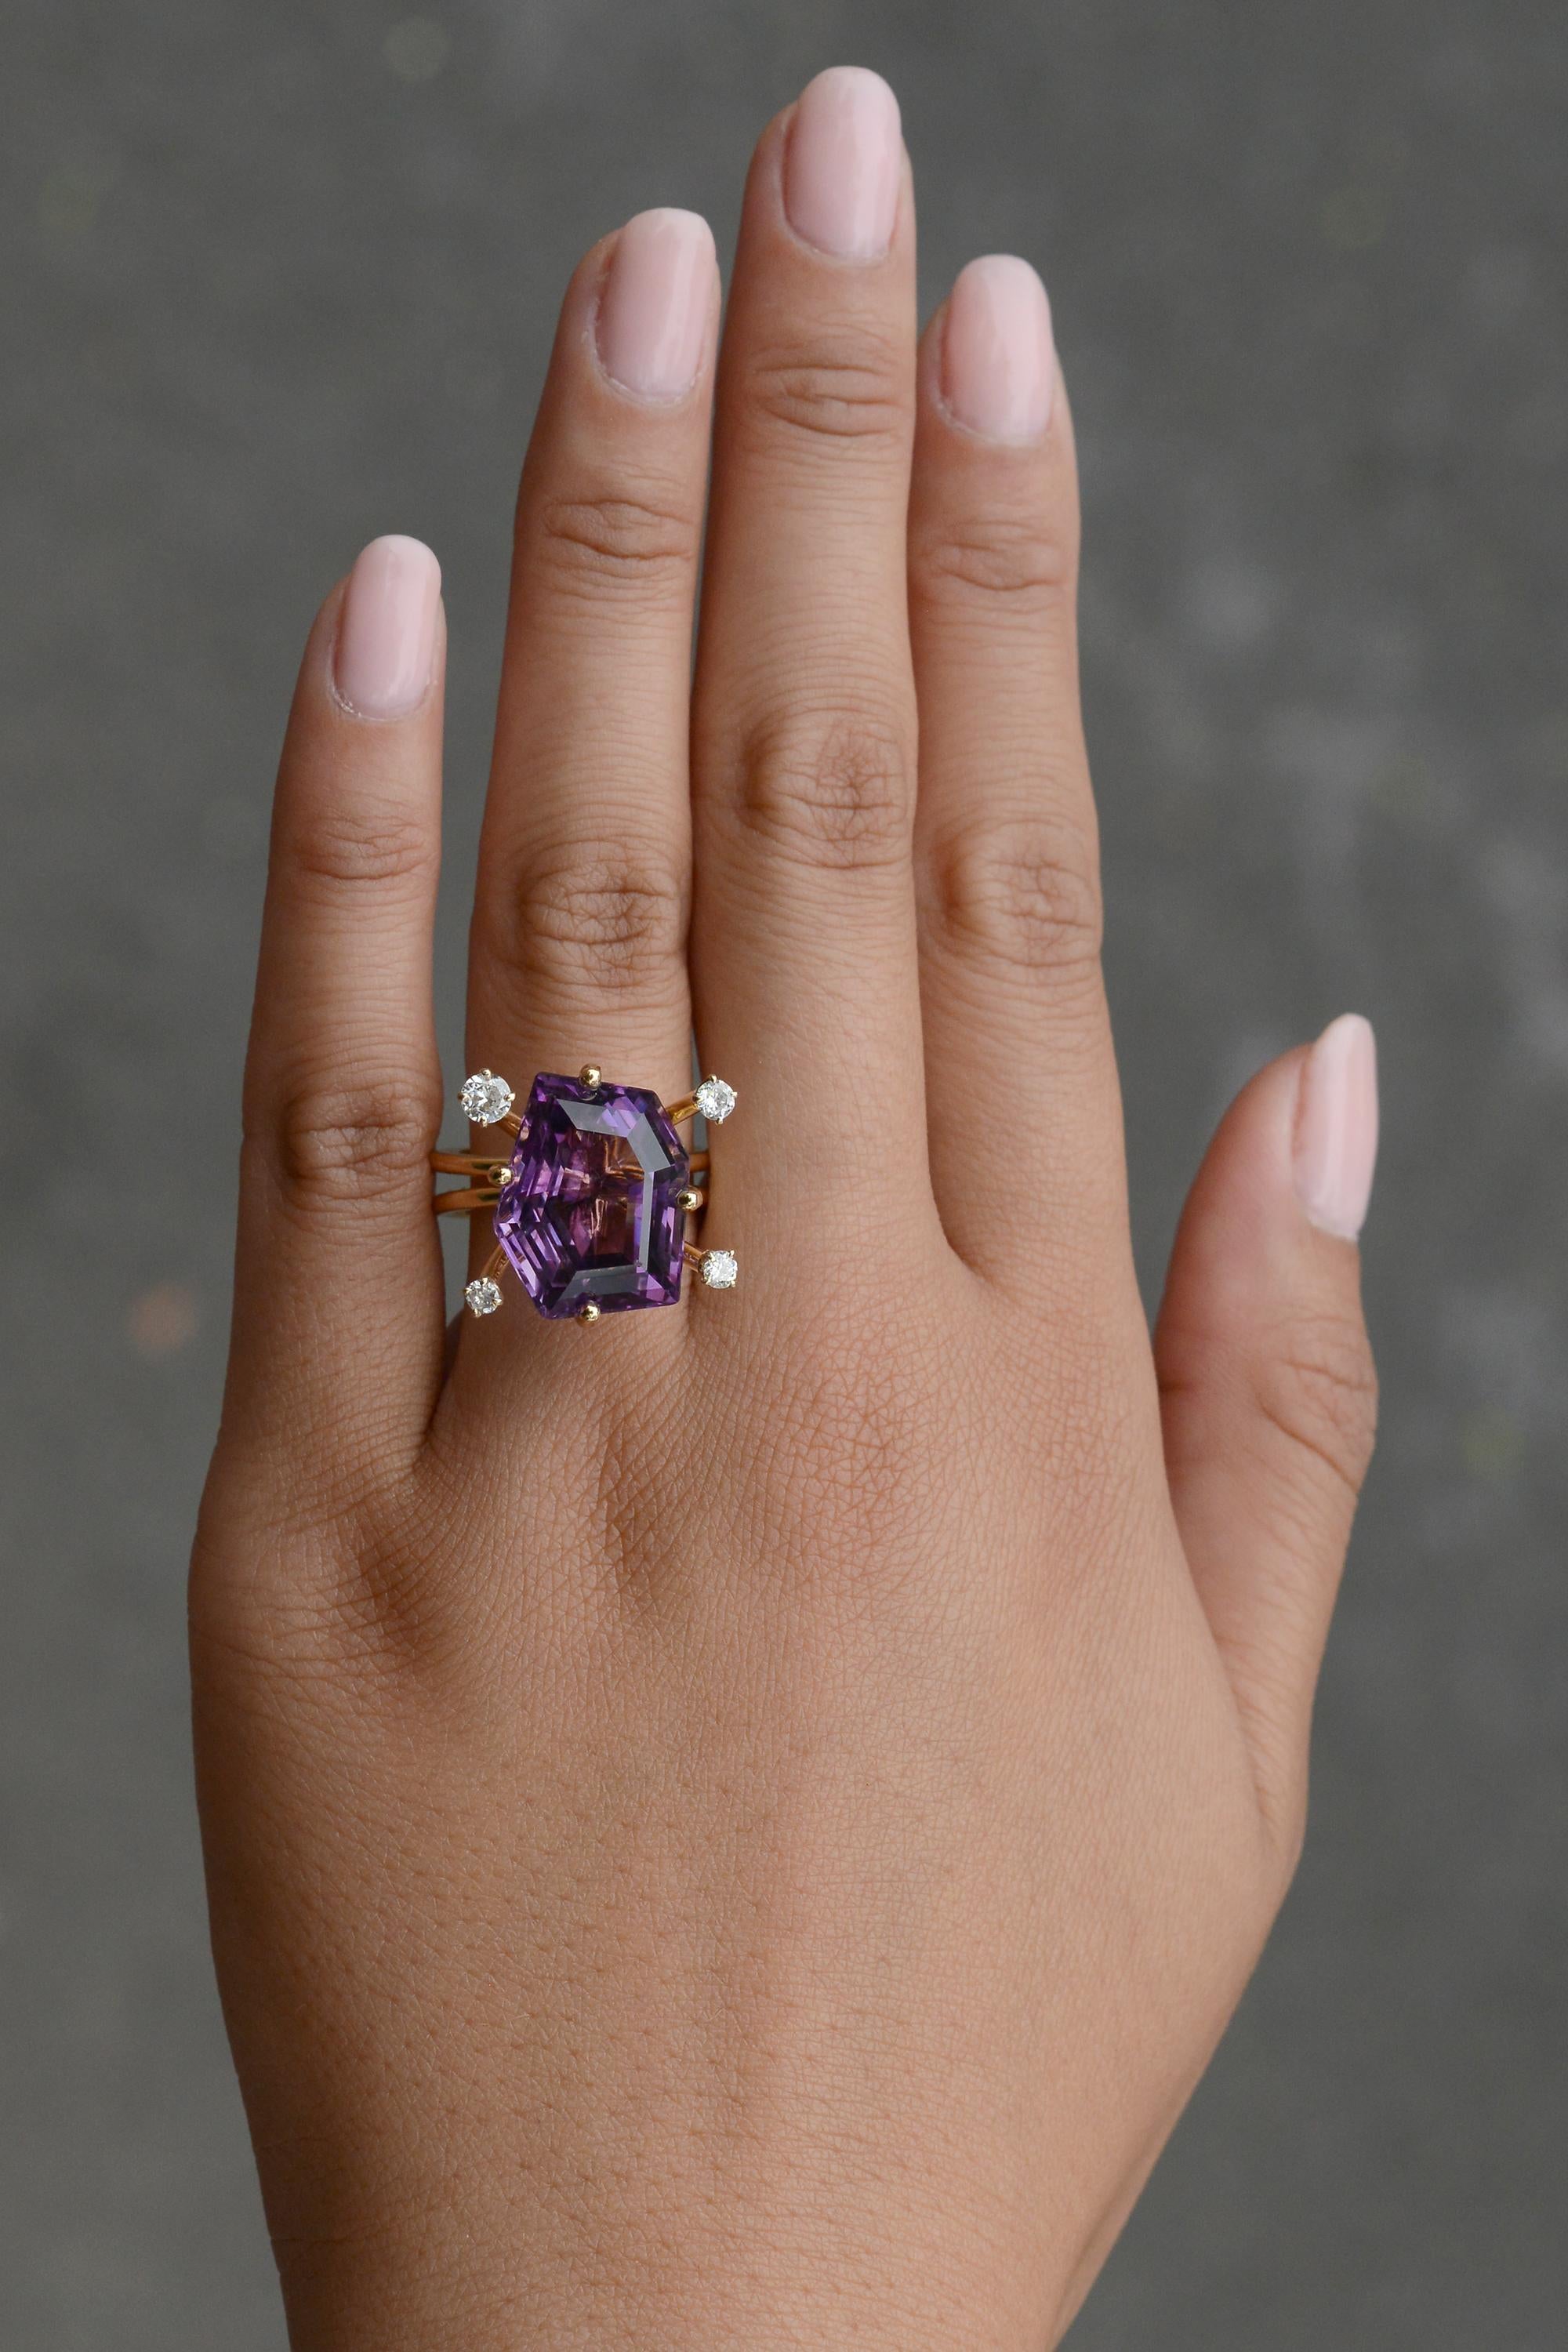 This exquisite amethyst and cocktail ring is truly a one of a kind estate jewel hailing from the Sputnik-era, circa late 1950s - early 1960s. An affordable luxury, this wildly geometric Modernist heirloom will surely become a treasured part of your